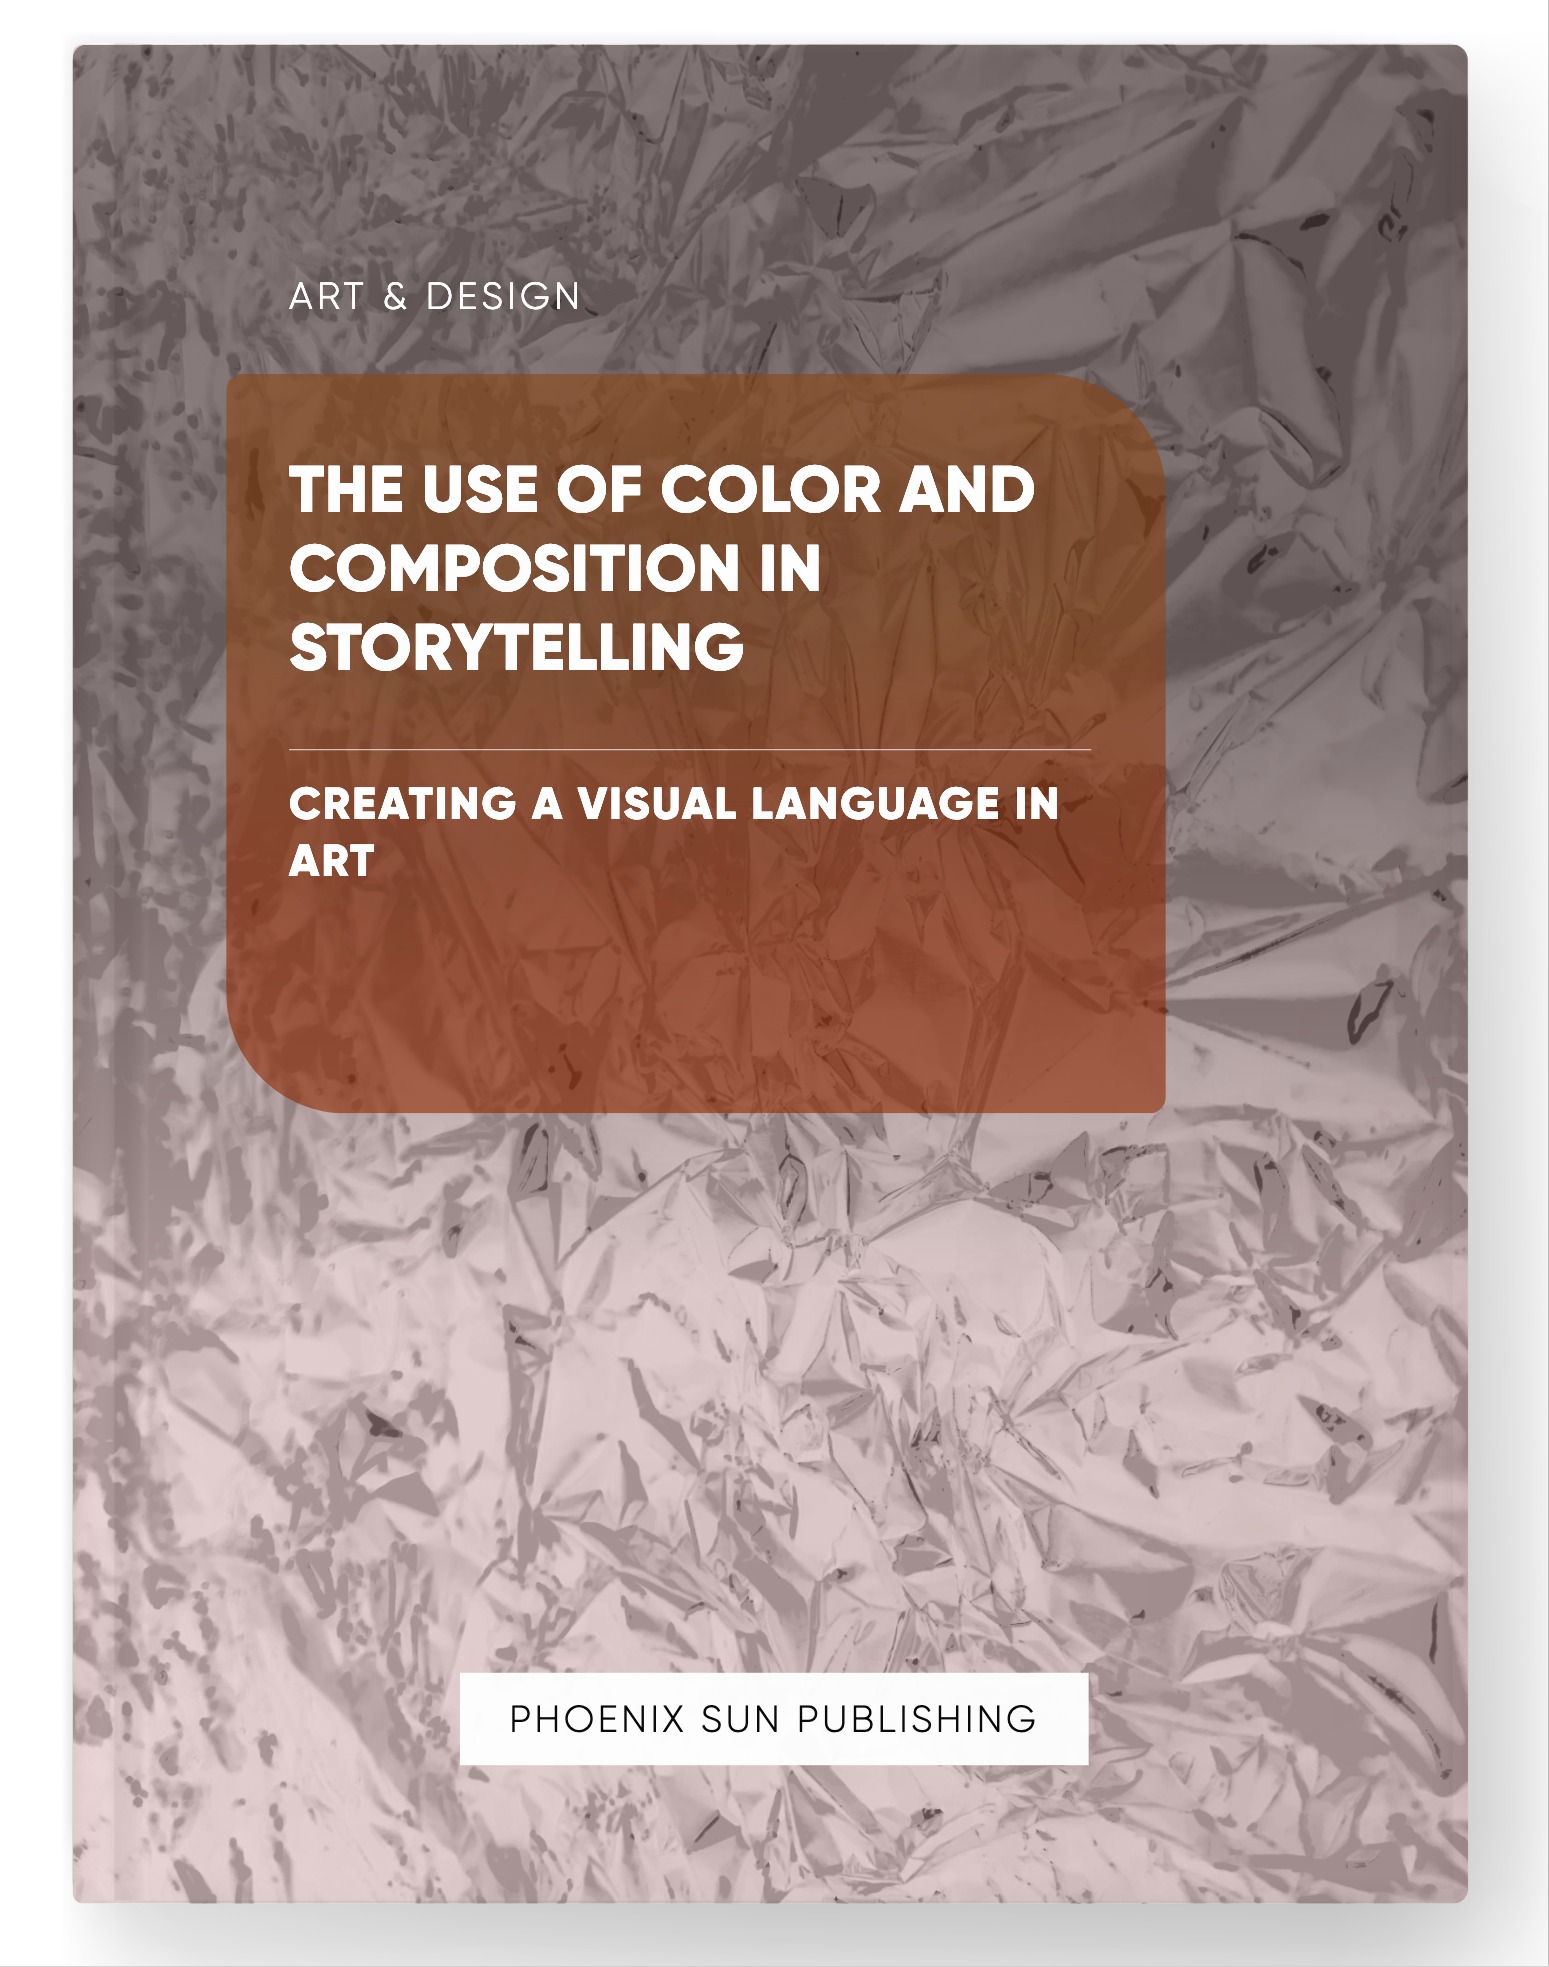 The Use of Color and Composition in Storytelling – Creating a Visual Language in Art